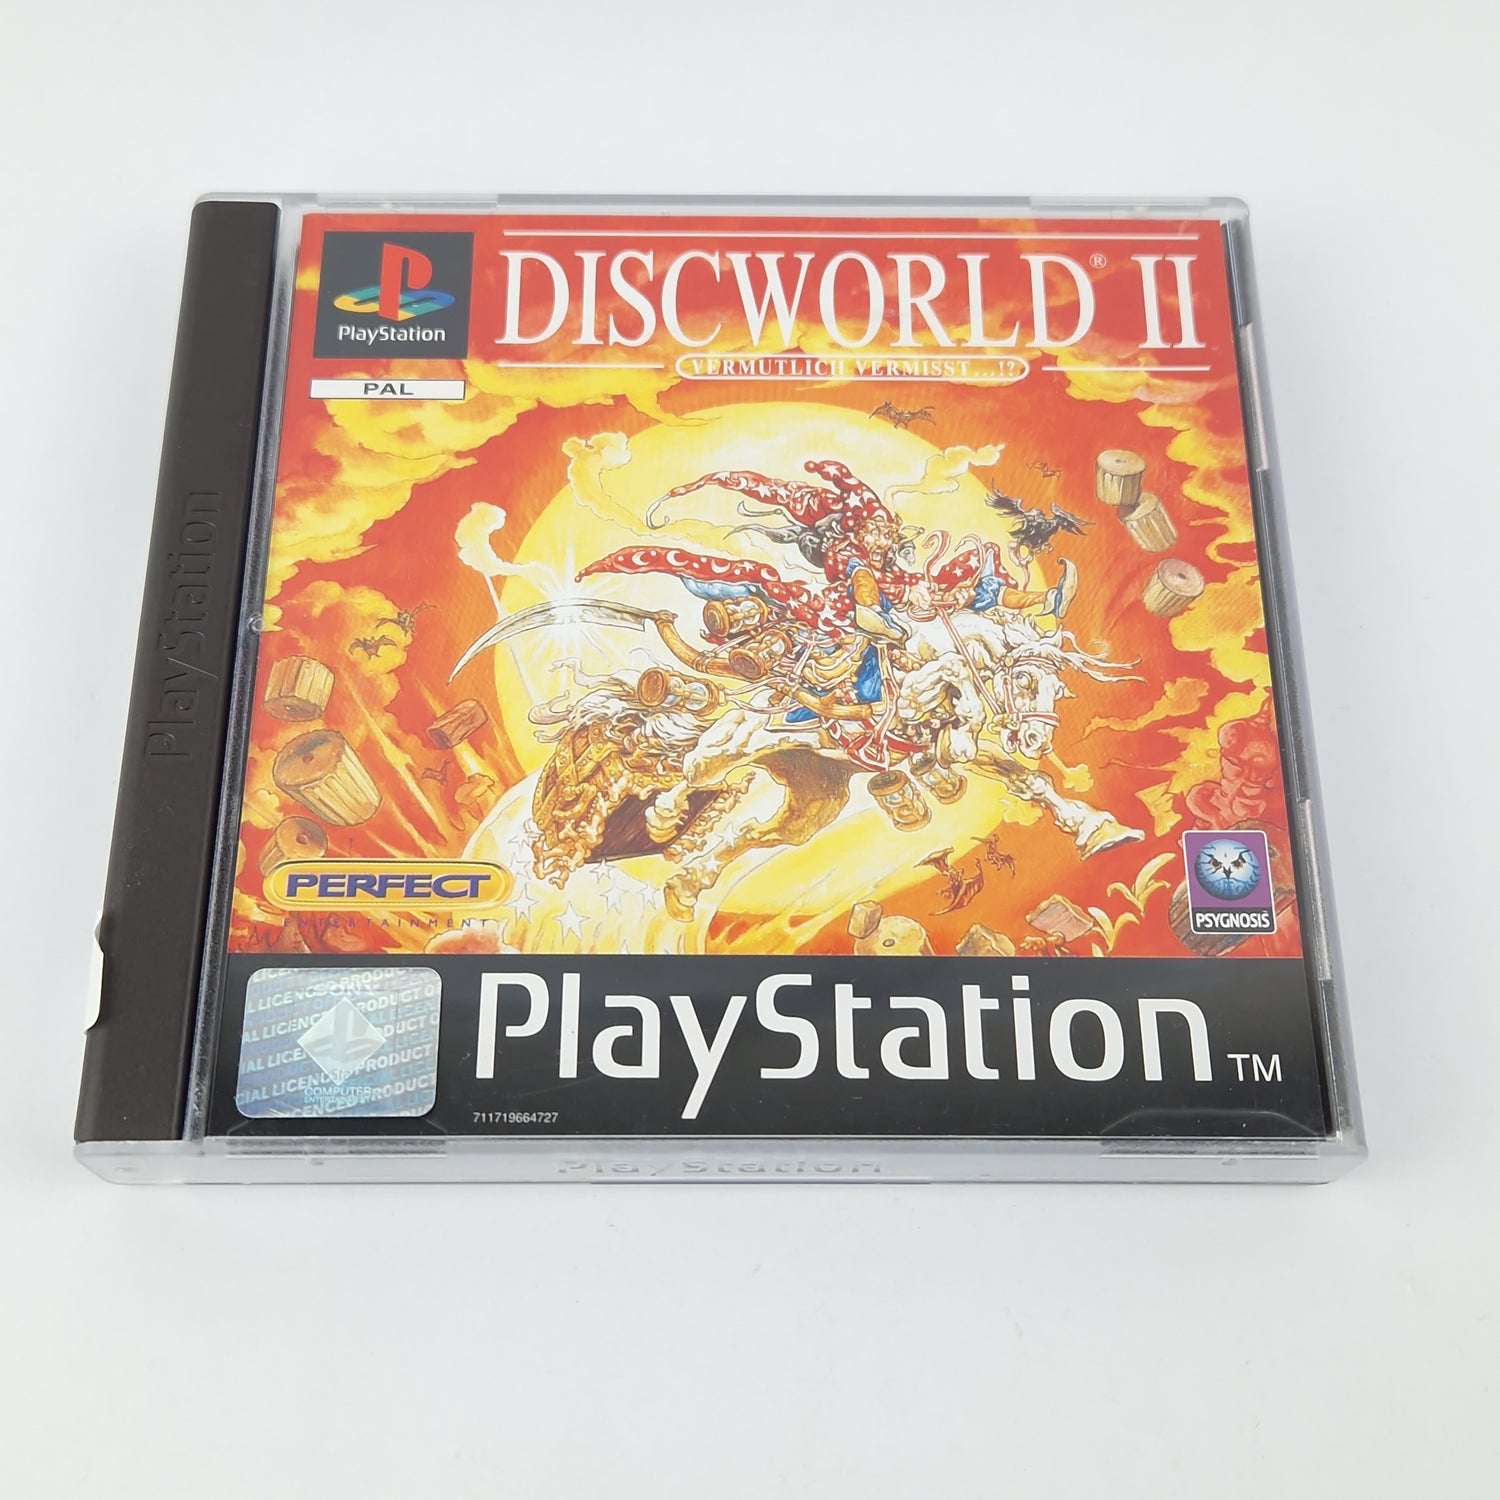 Playstation 1 game: Discworld II - CD instructions OVP | PS1 PSX PSone PAL